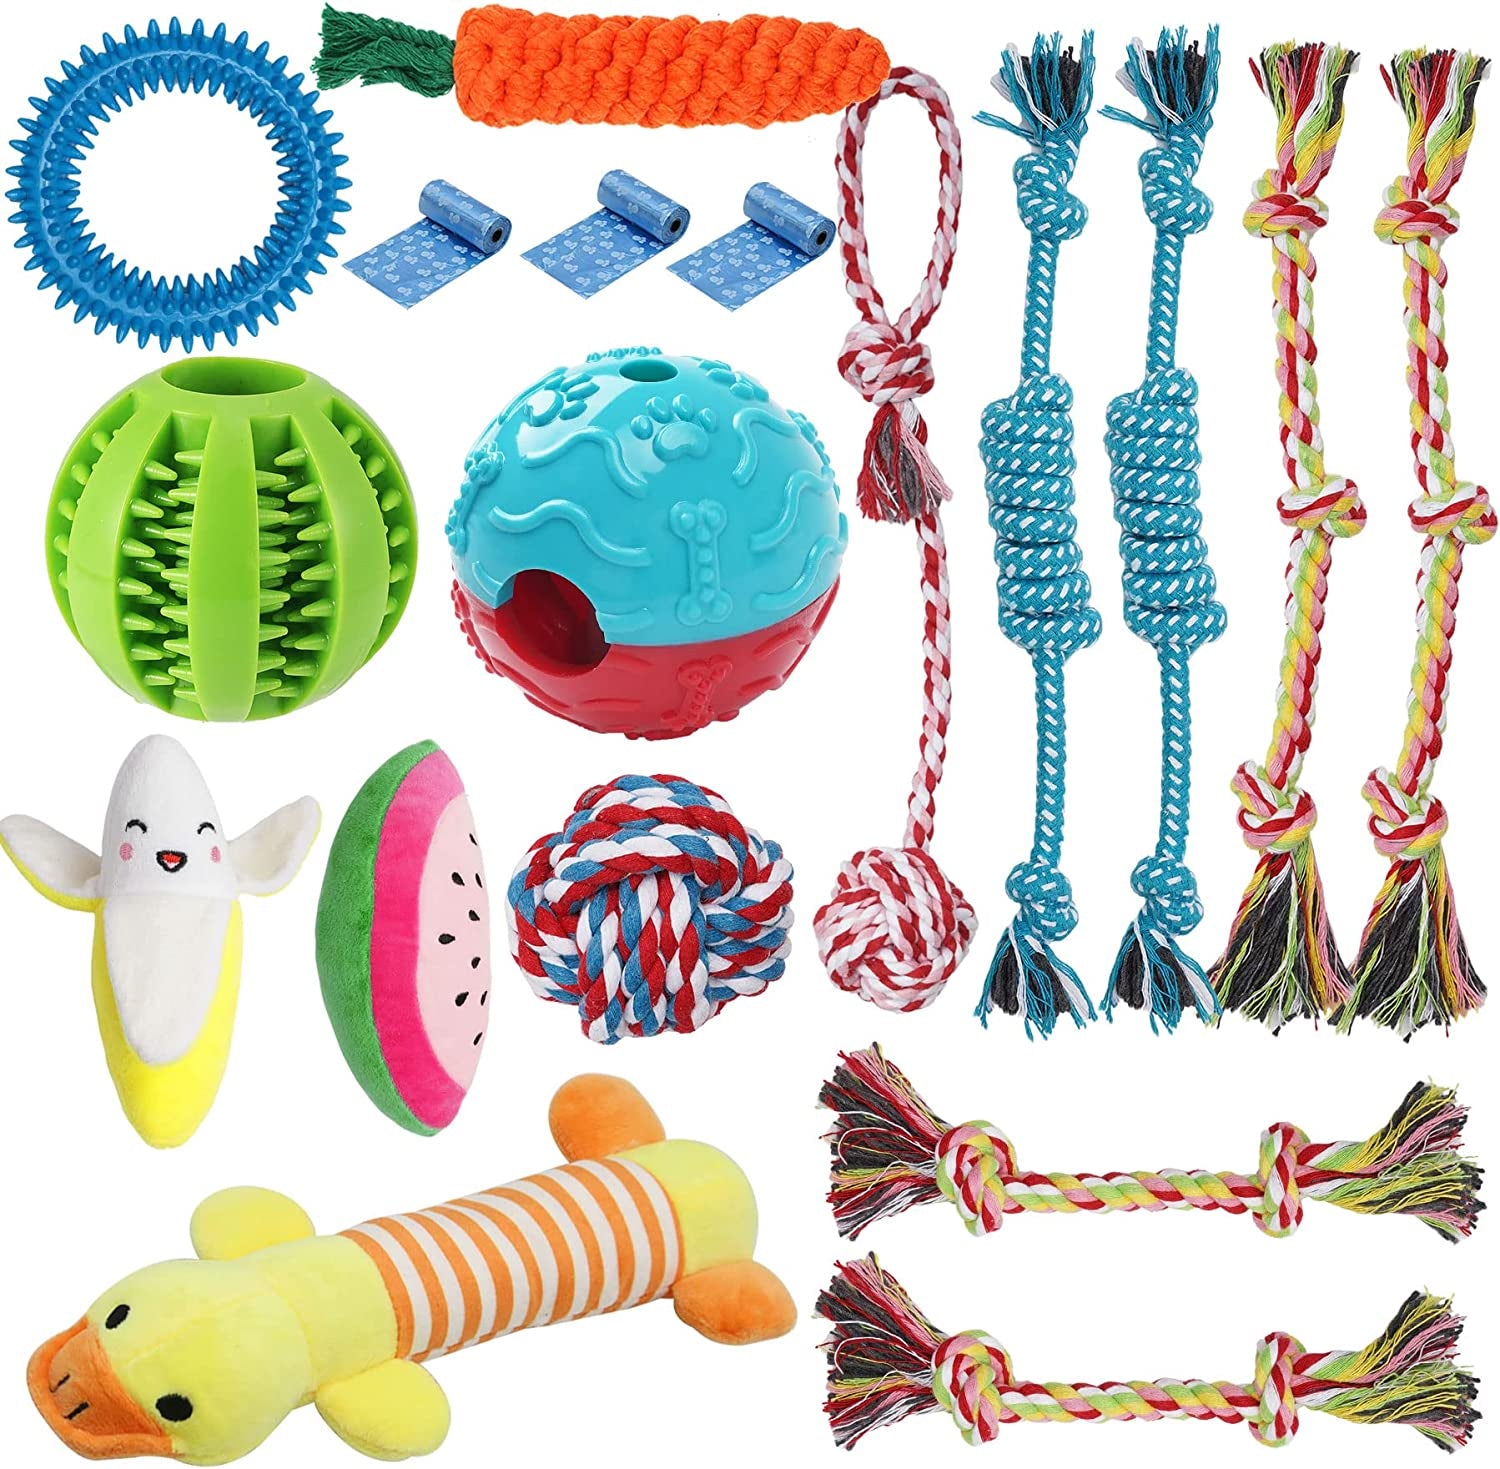 Dog Chew Toys ( 20-pack ) - Everyday-Sales.com